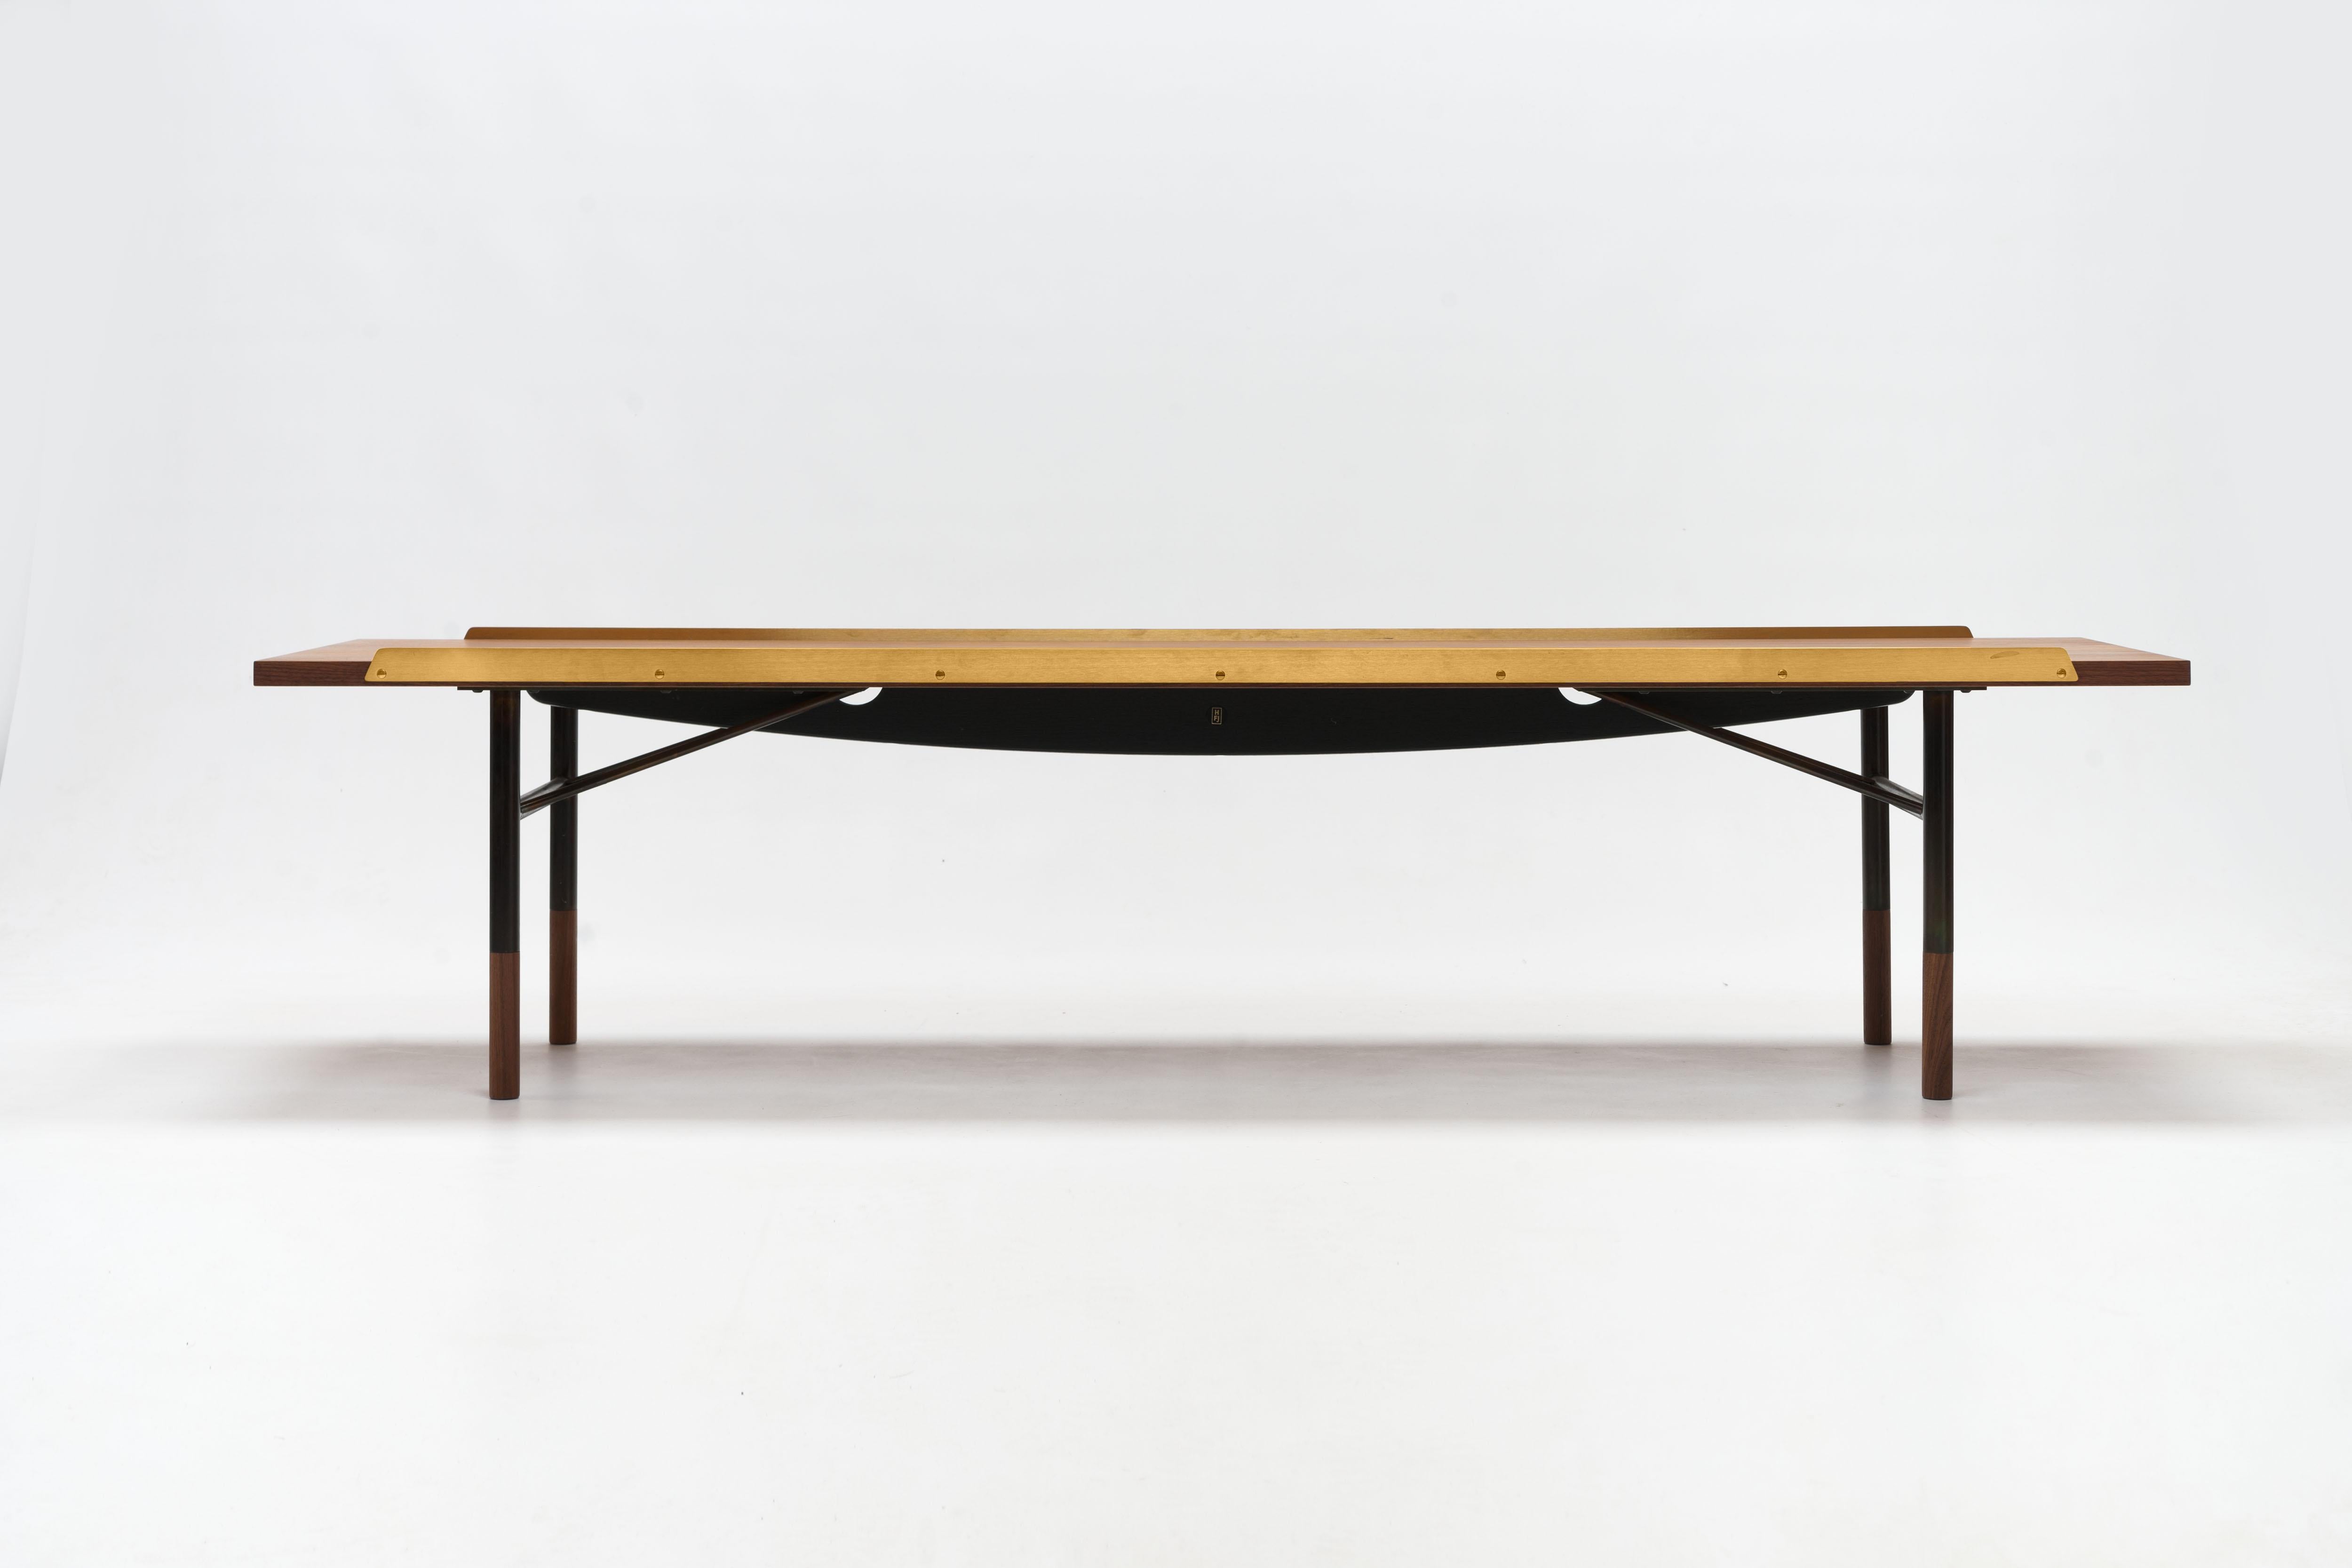 Low bench table by Finn Juhl in walnut with brass edges by One Collection / House of Finn Juhl with loose cushion in SONAR #734 fabric by Raf Simons for Kvadrat. 

This versatile piece can be used free standing as a bench or coffee table or as a